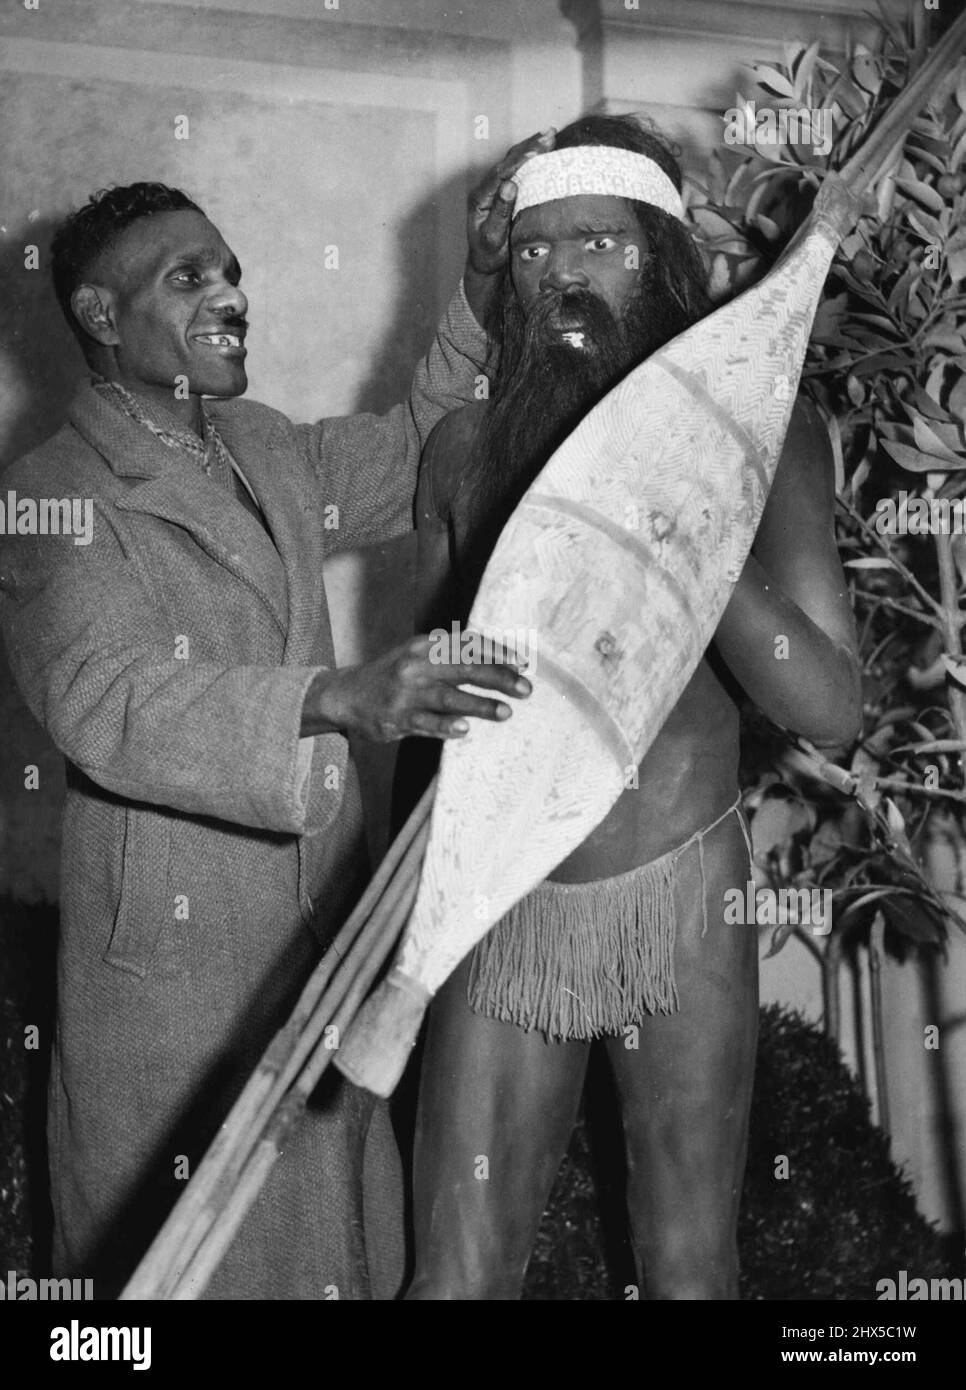 Jimmy James S. Australian blacktracker inspect a life - size aboriginal figurine at the Melbourne N. Territory Exhibition. August 02, 1938. Stock Photo